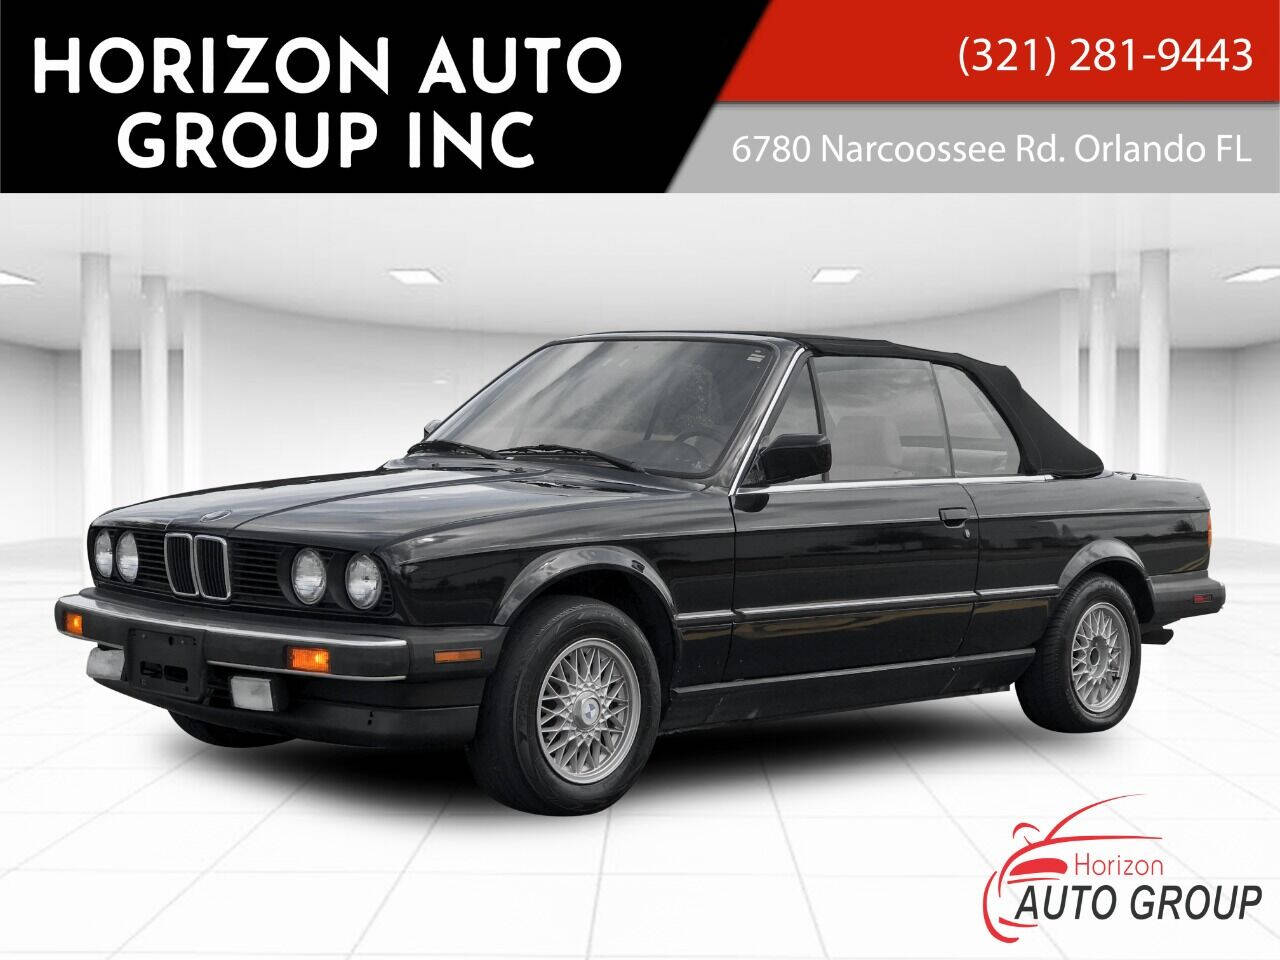 Used 1990 Bmw 3 Series For Sale Carsforsale Com